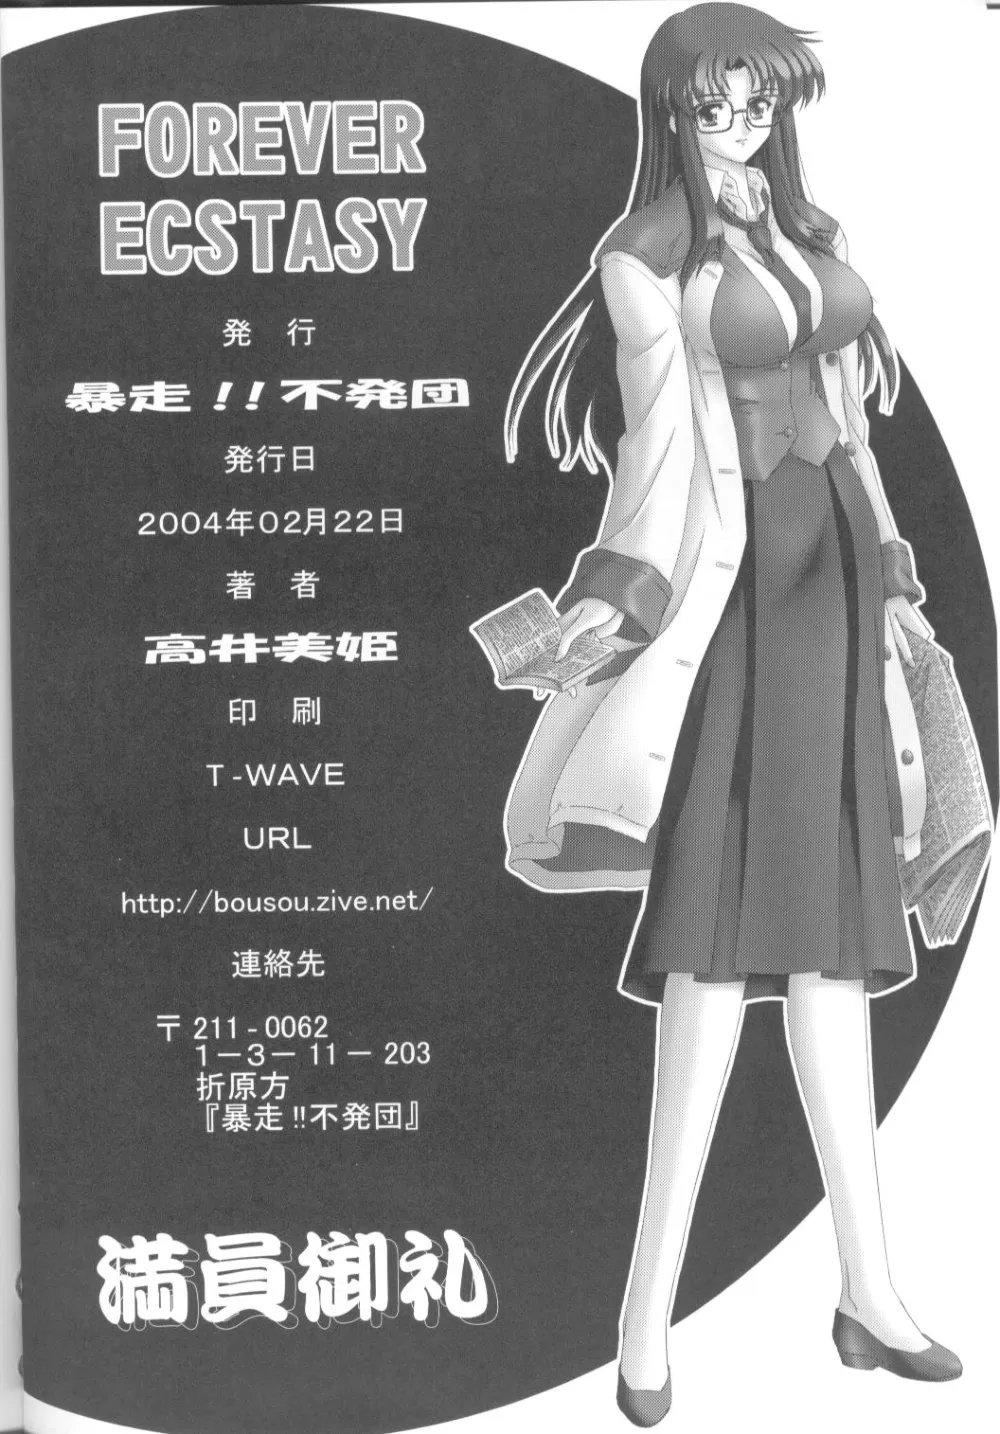 Read Or Die,Forever Ecstacy [Japanese][第32页]